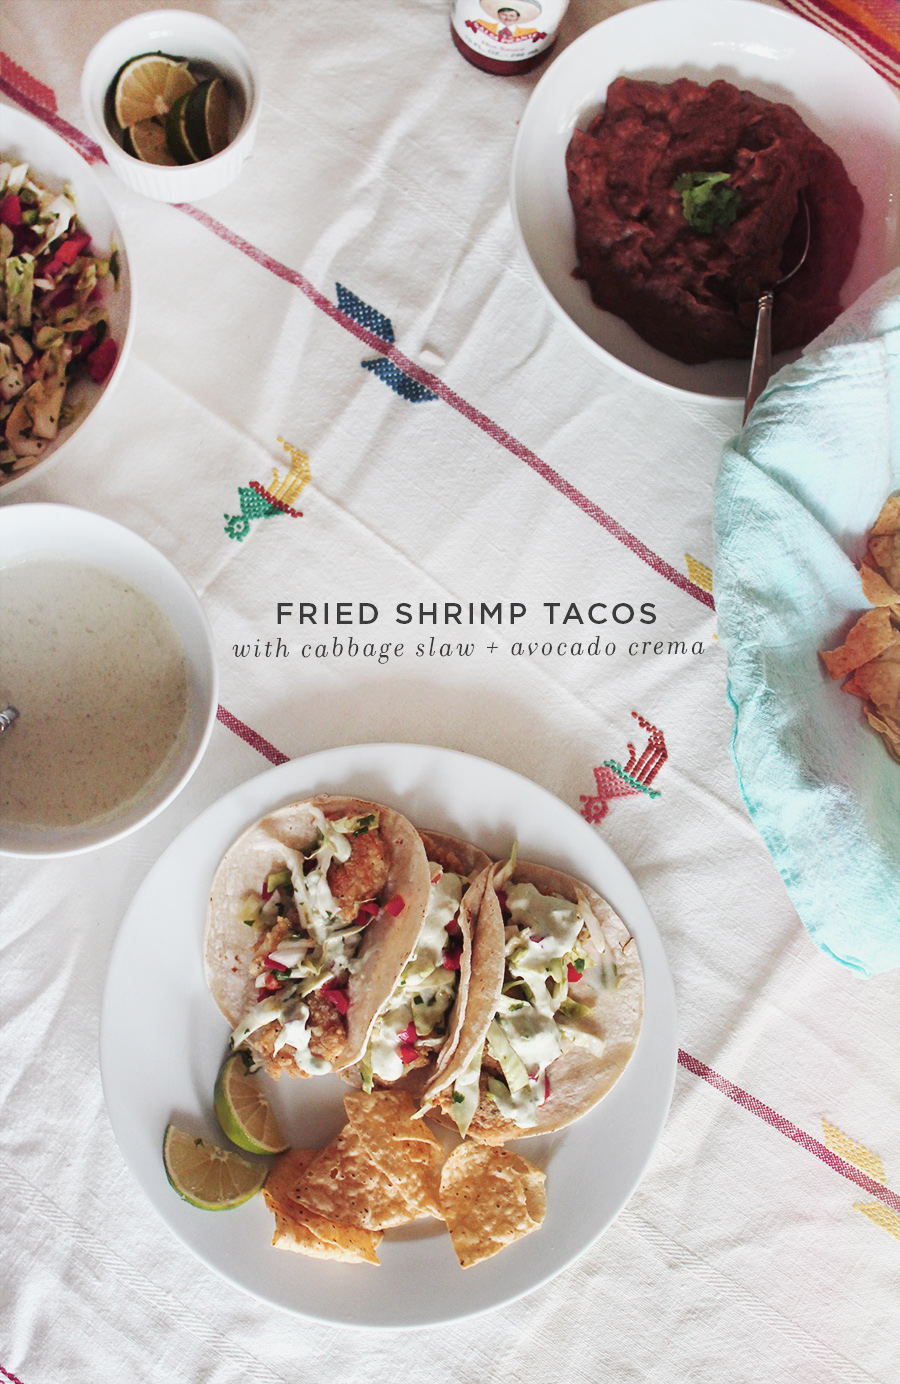 fried shrimp tacos with cabbage slaw | via almost makes perfect